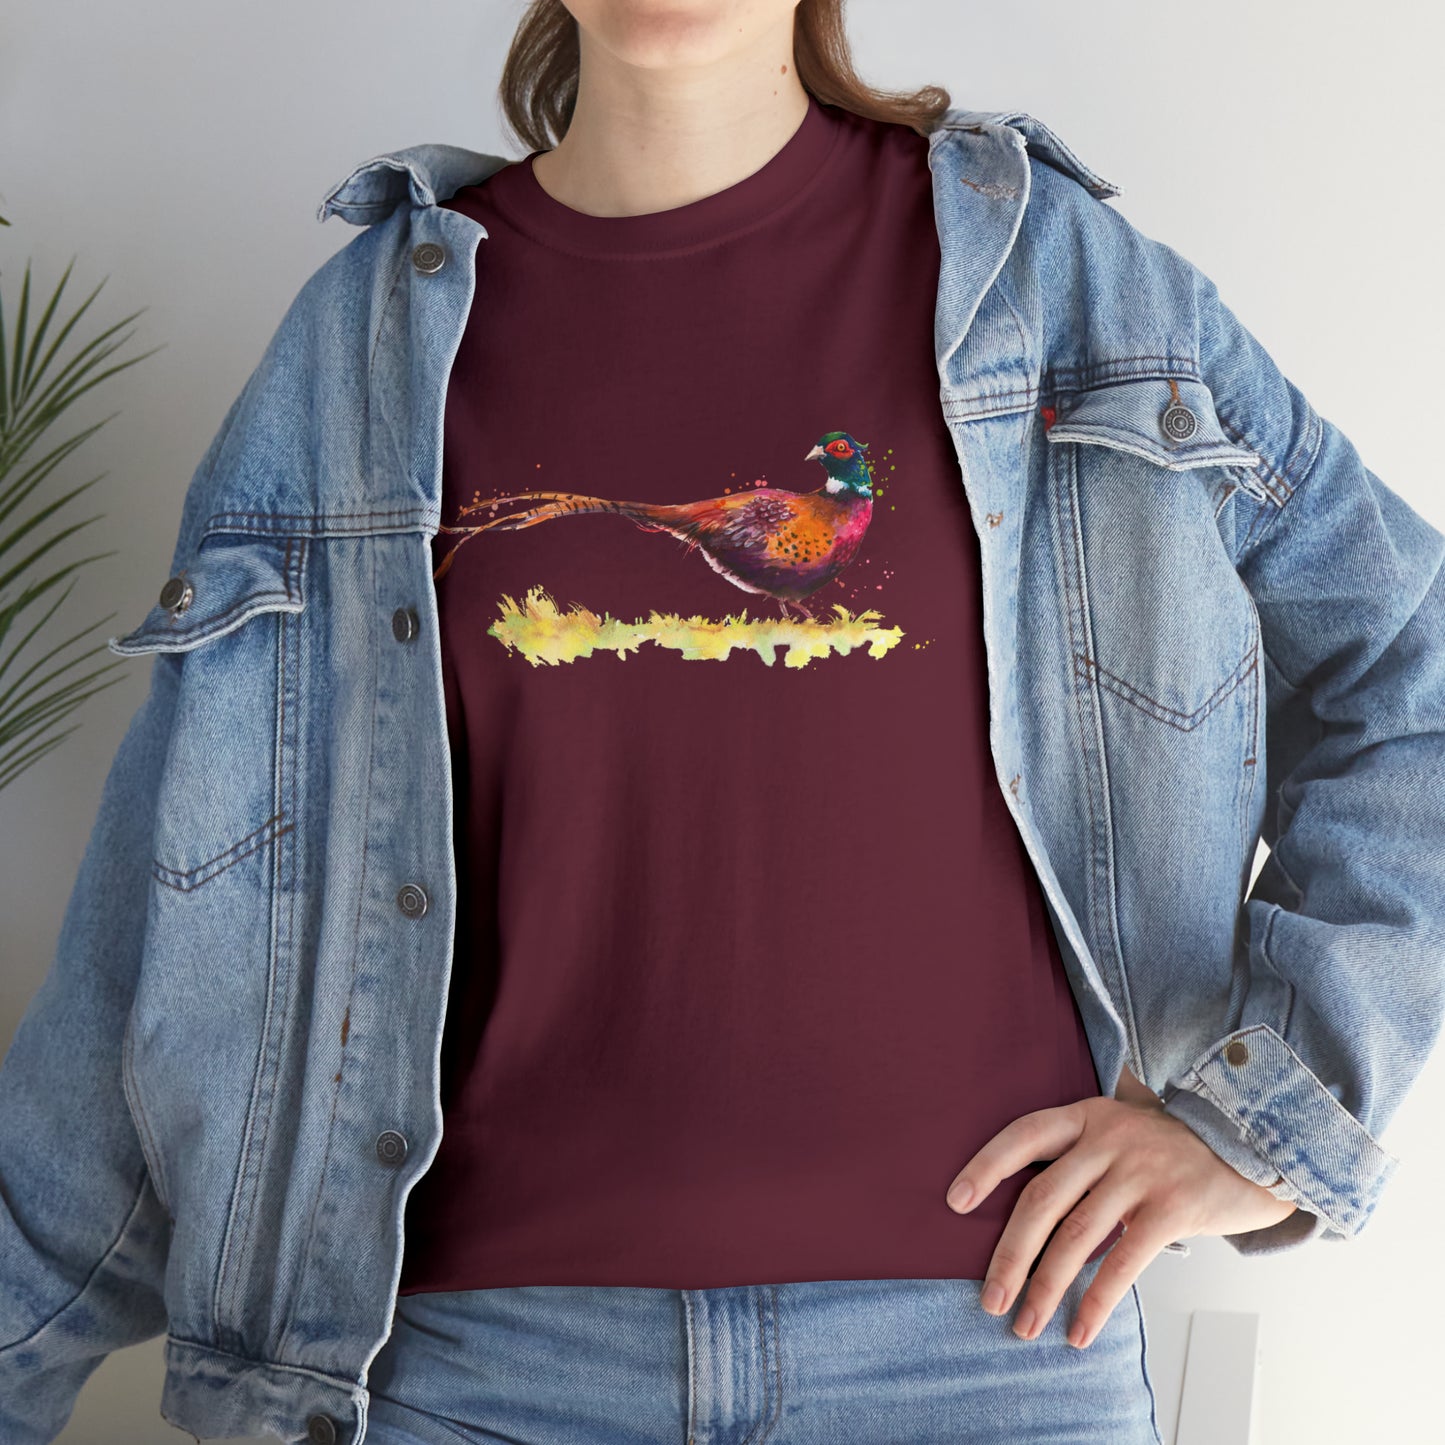 Mock up of a woman wearing the Maroon shirt under a denim jacket